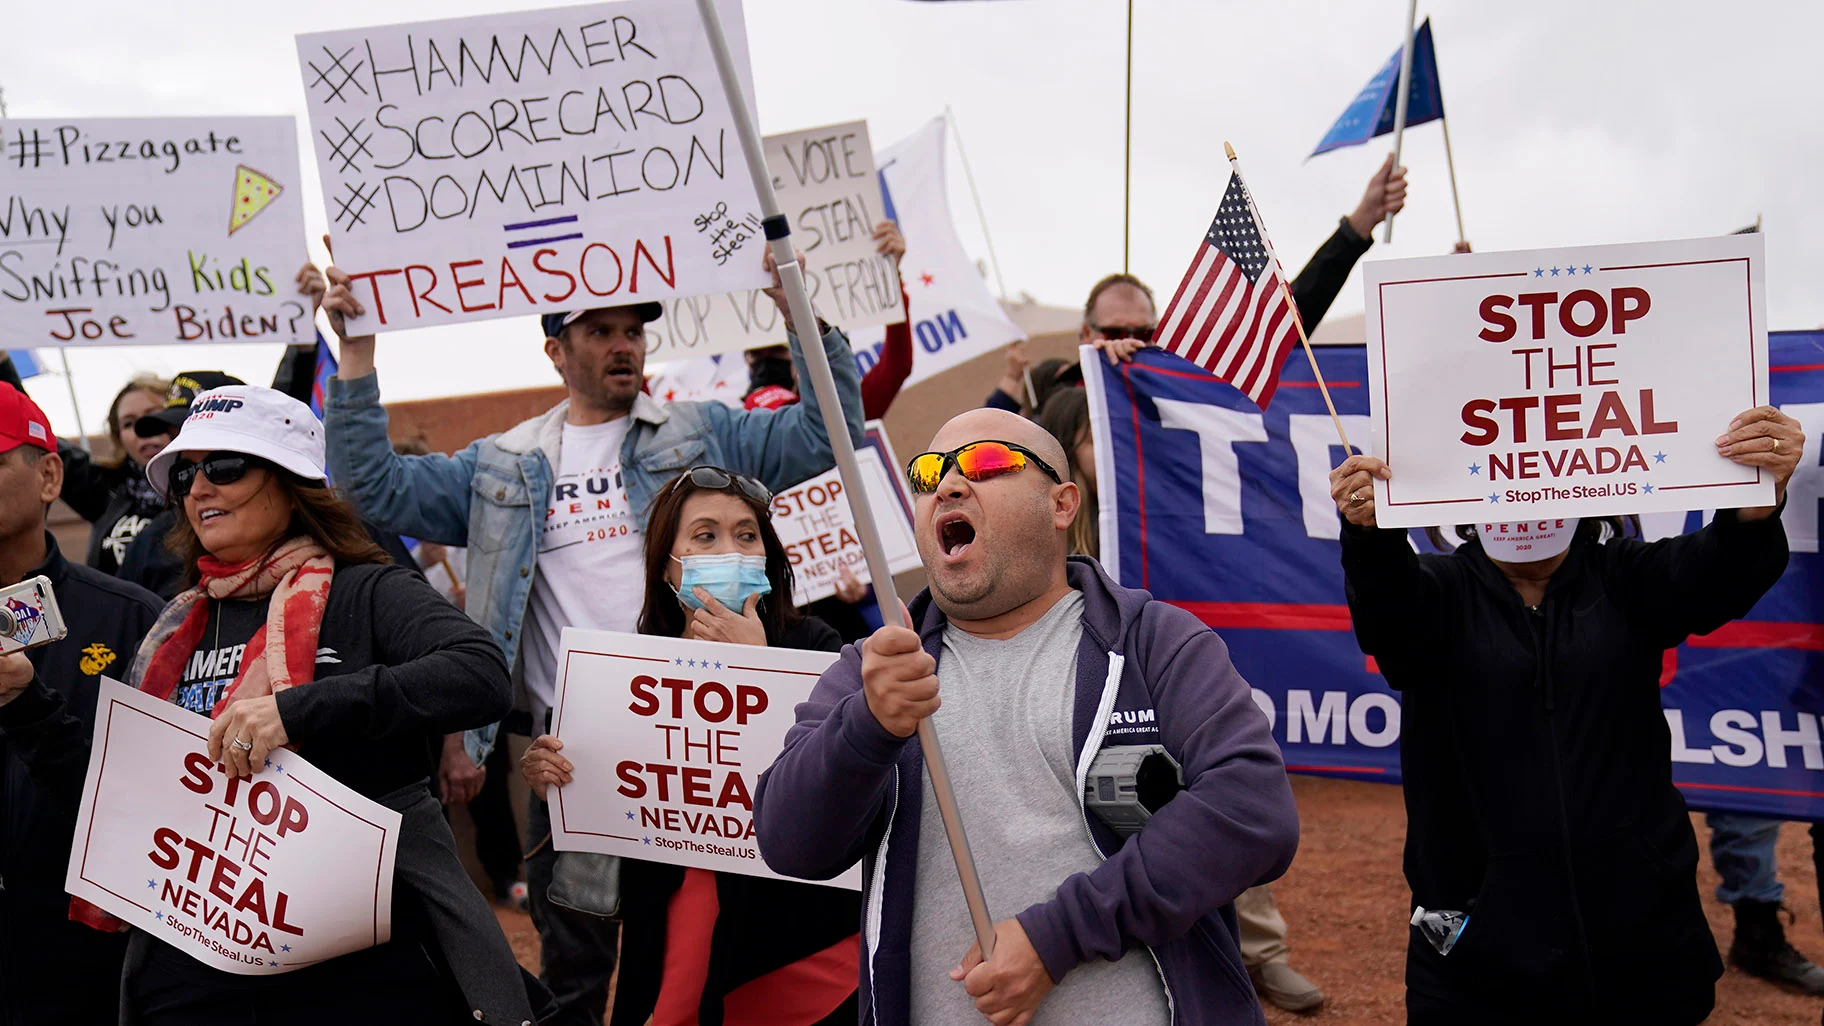 Supporters of President Donald Trump protest outside of the Clark County Elections Department in North Las Vegas, Nev., Saturday, Nov. 7, 2020. (AP Photo / John Locher)